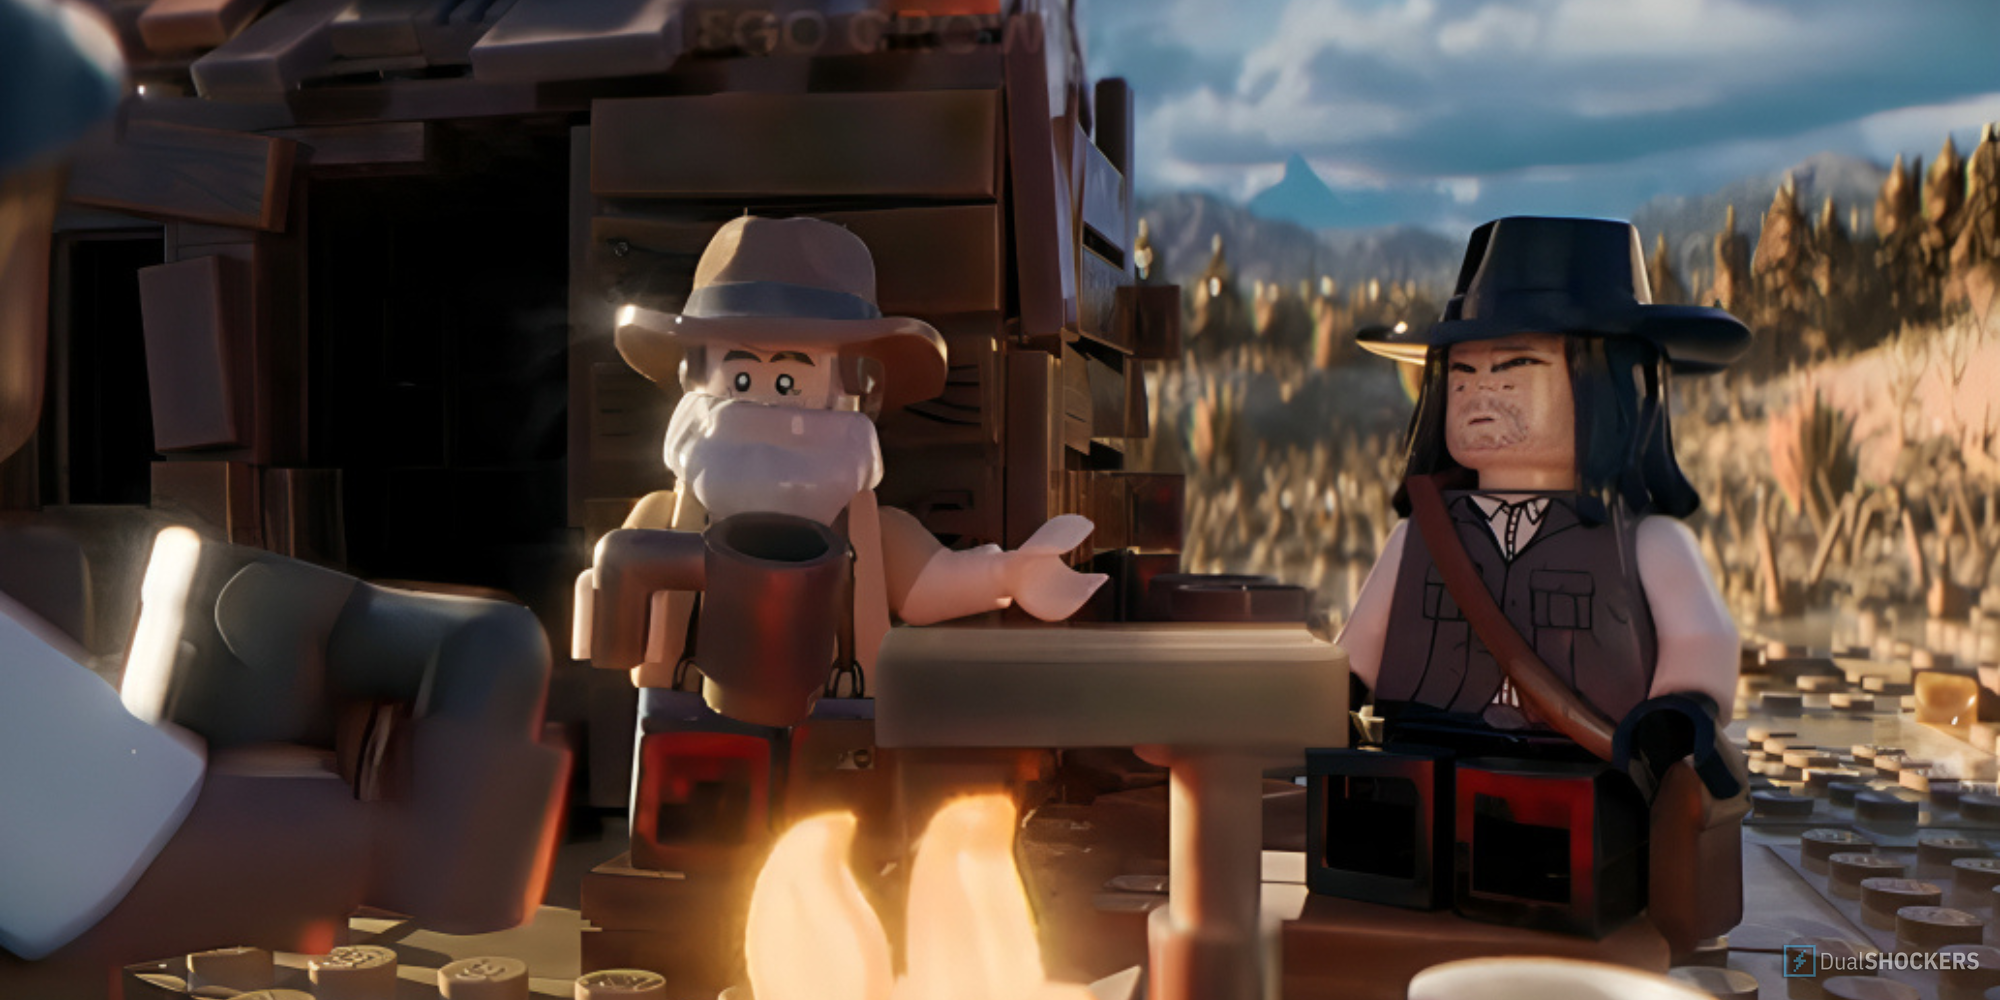 LEGO Animation with Uncle and John Marston From Red Dead Redemption 2